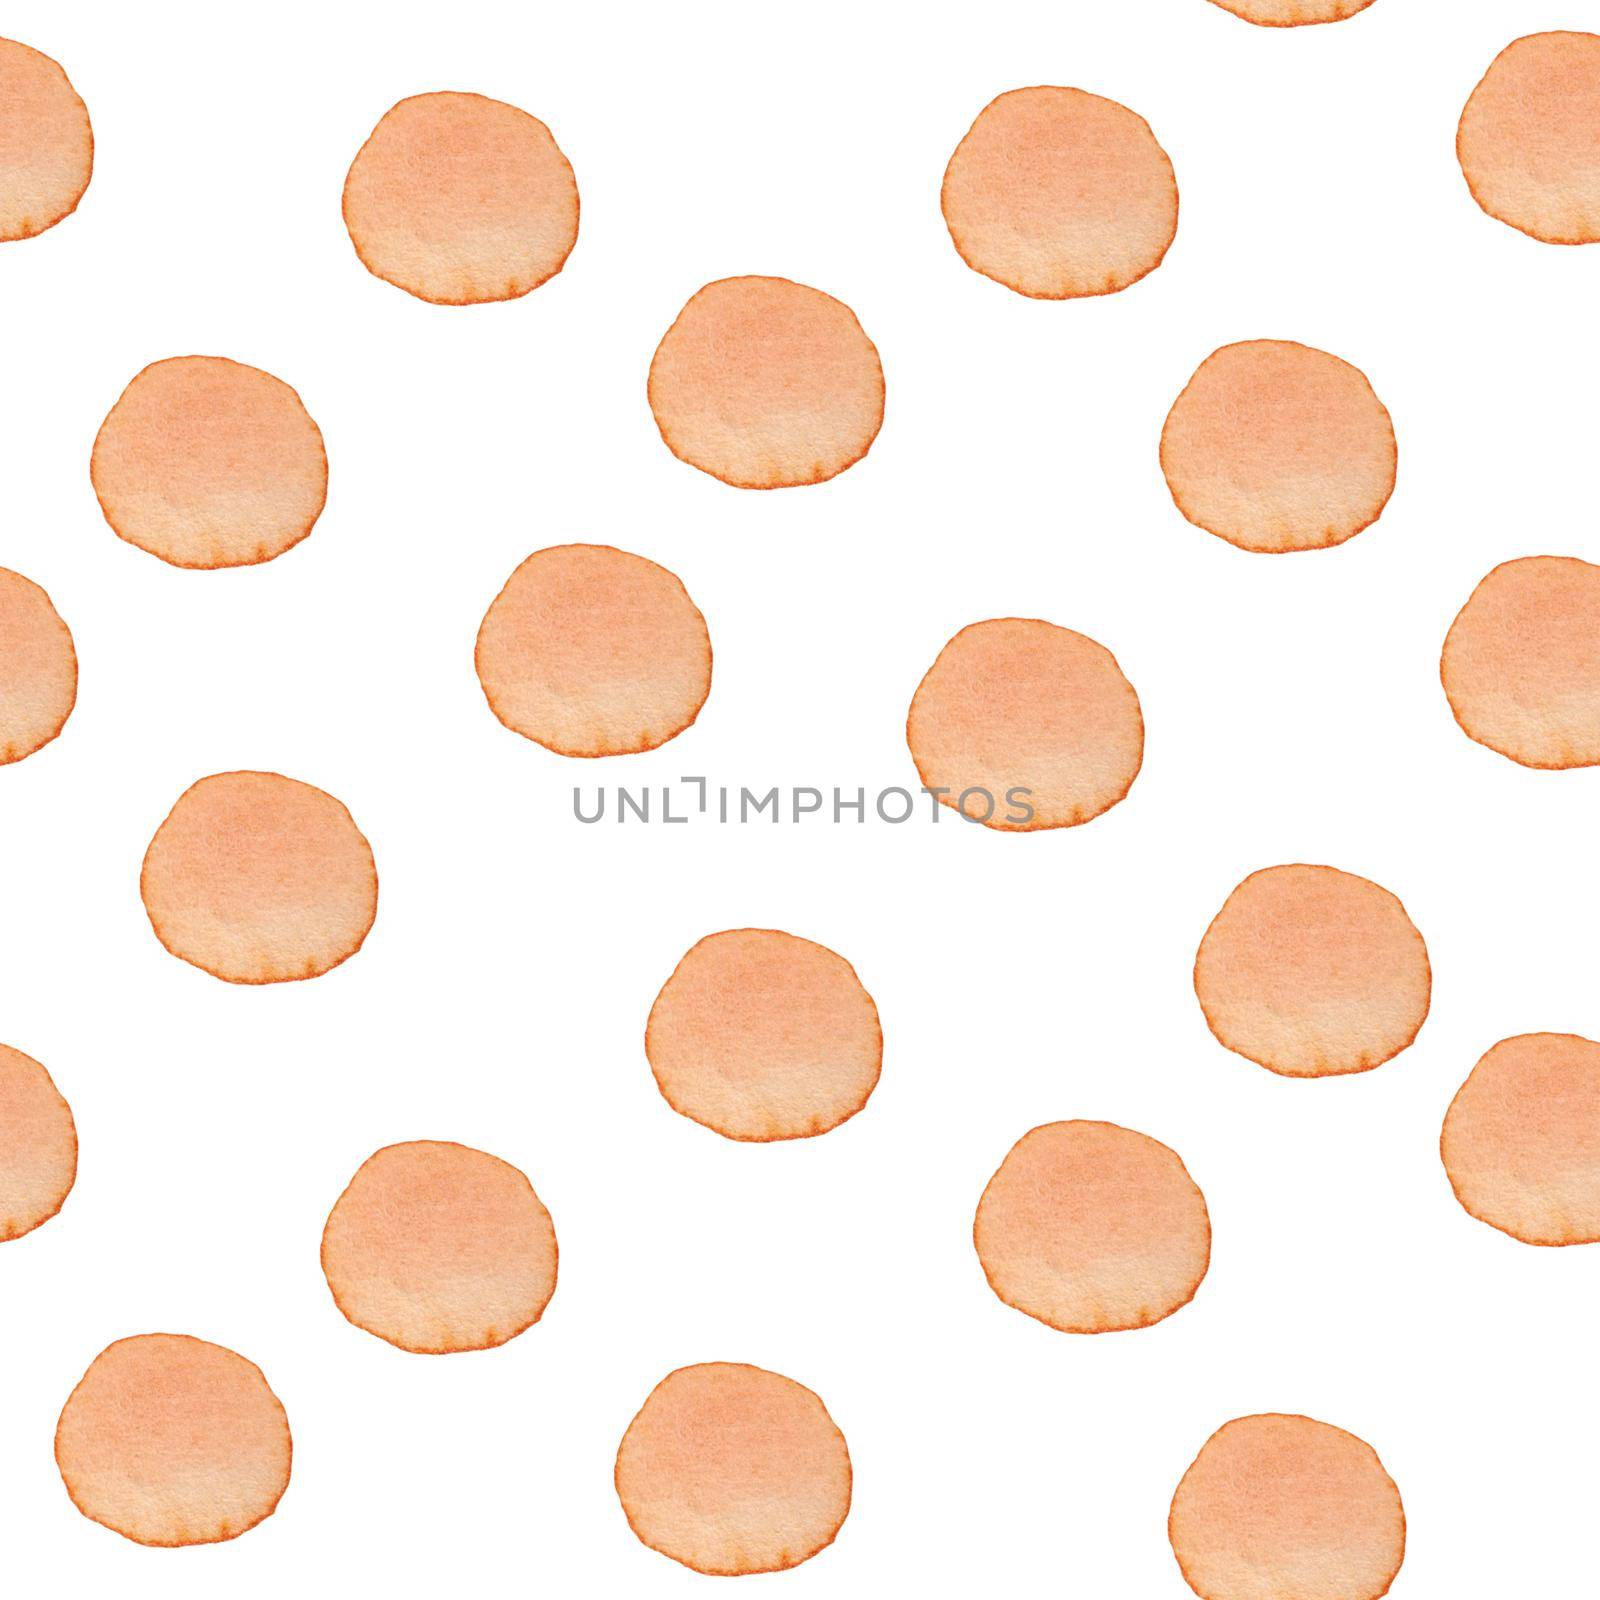 Hand Painted Brush Polka Dot Seamless Watercolor Pattern. Abstract watercolour Round Circles in Orange Color. Artistic Design for Fabric and Background.